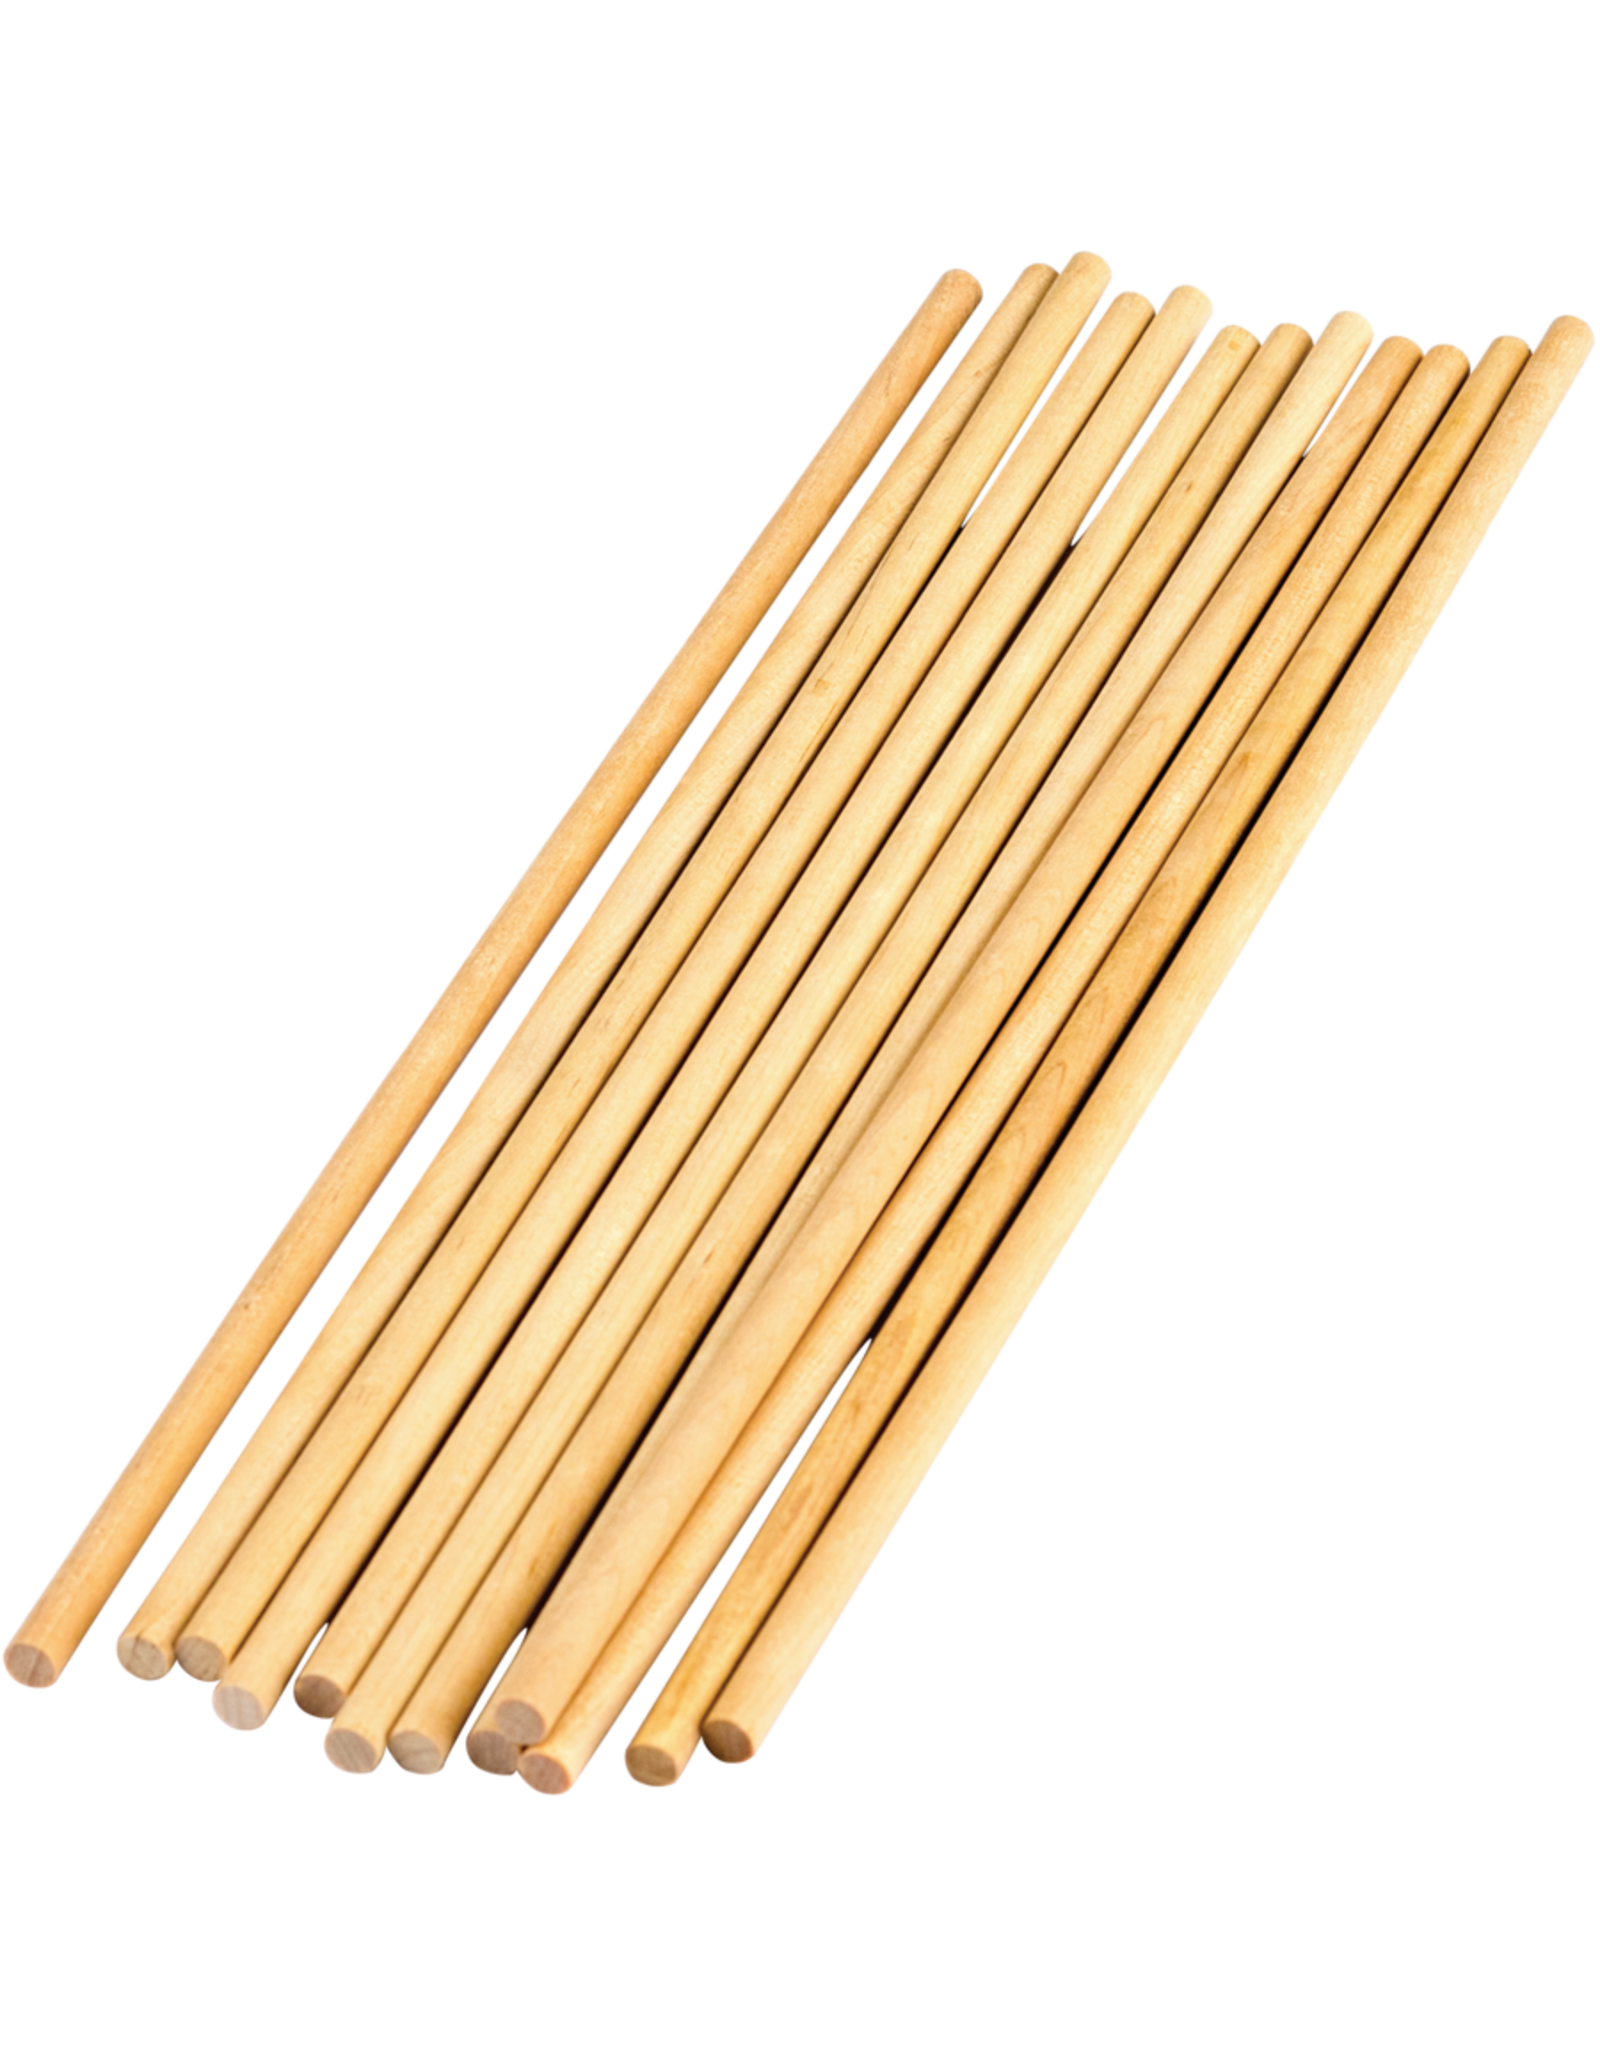 1/4 inch Wood Dowels 12 Pieces